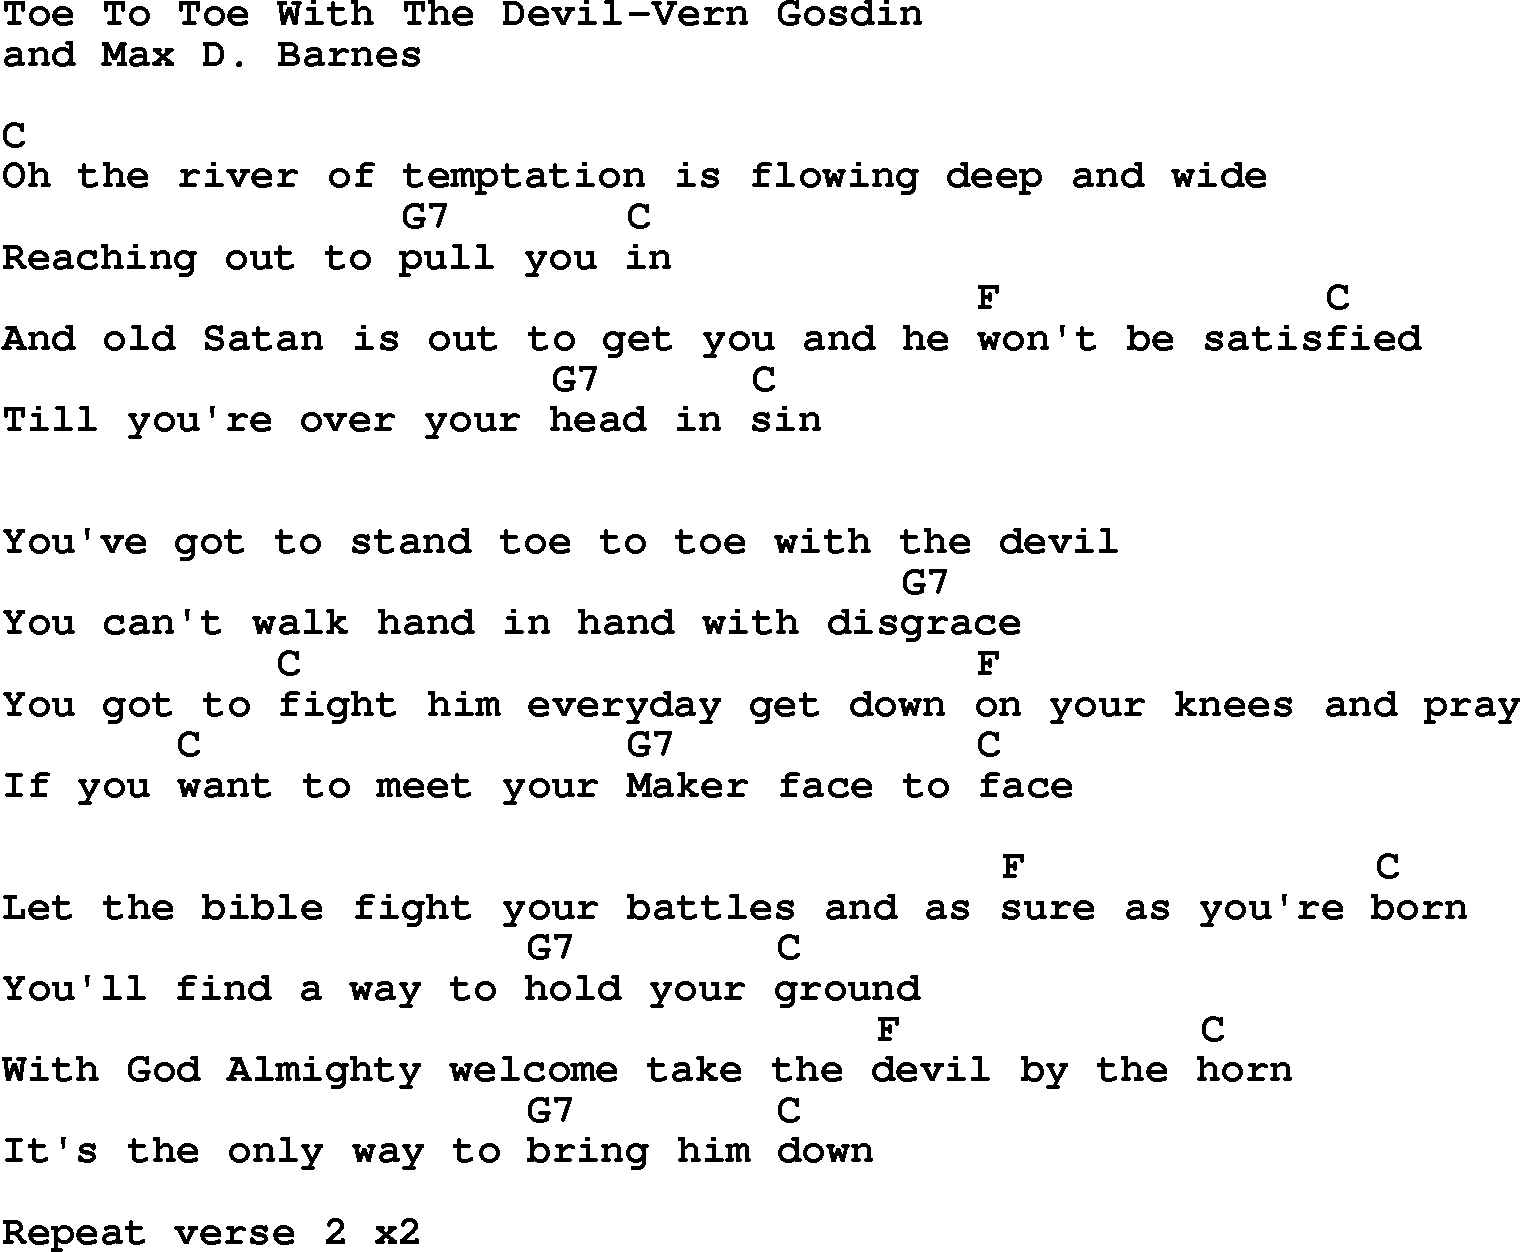 Country, Southern and Bluegrass Gospel Song Toe To Toe With The Devil-Vern Gosdin lyrics and chords